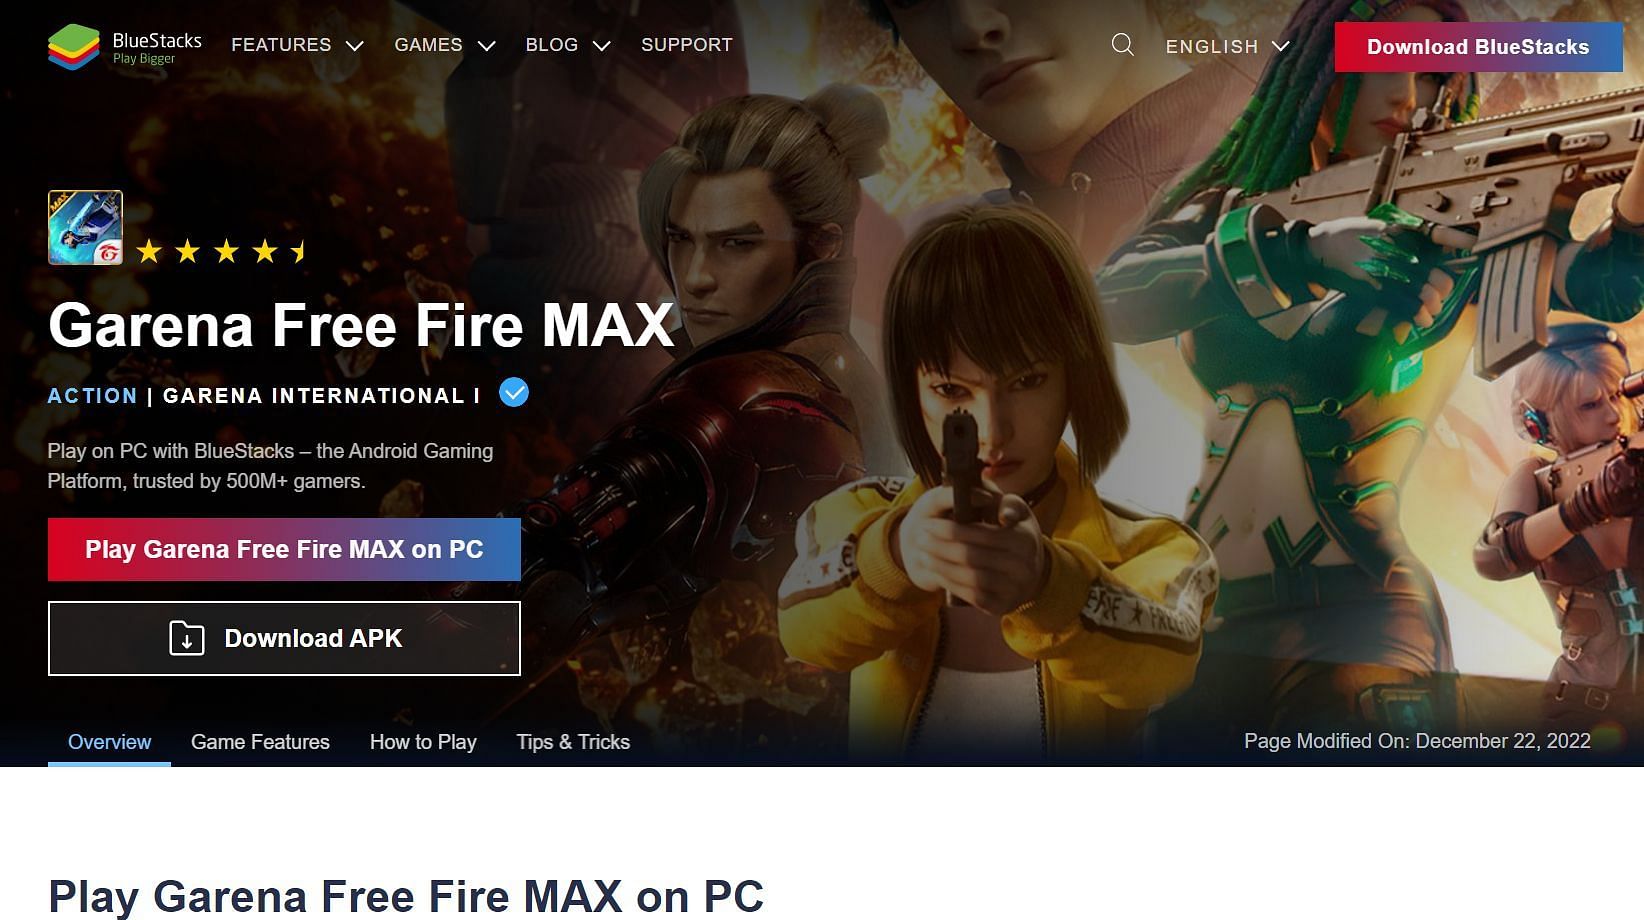 Emulators allow players to install an Android game like Free Fire MAX on their PCs (Image via BlueStacks)